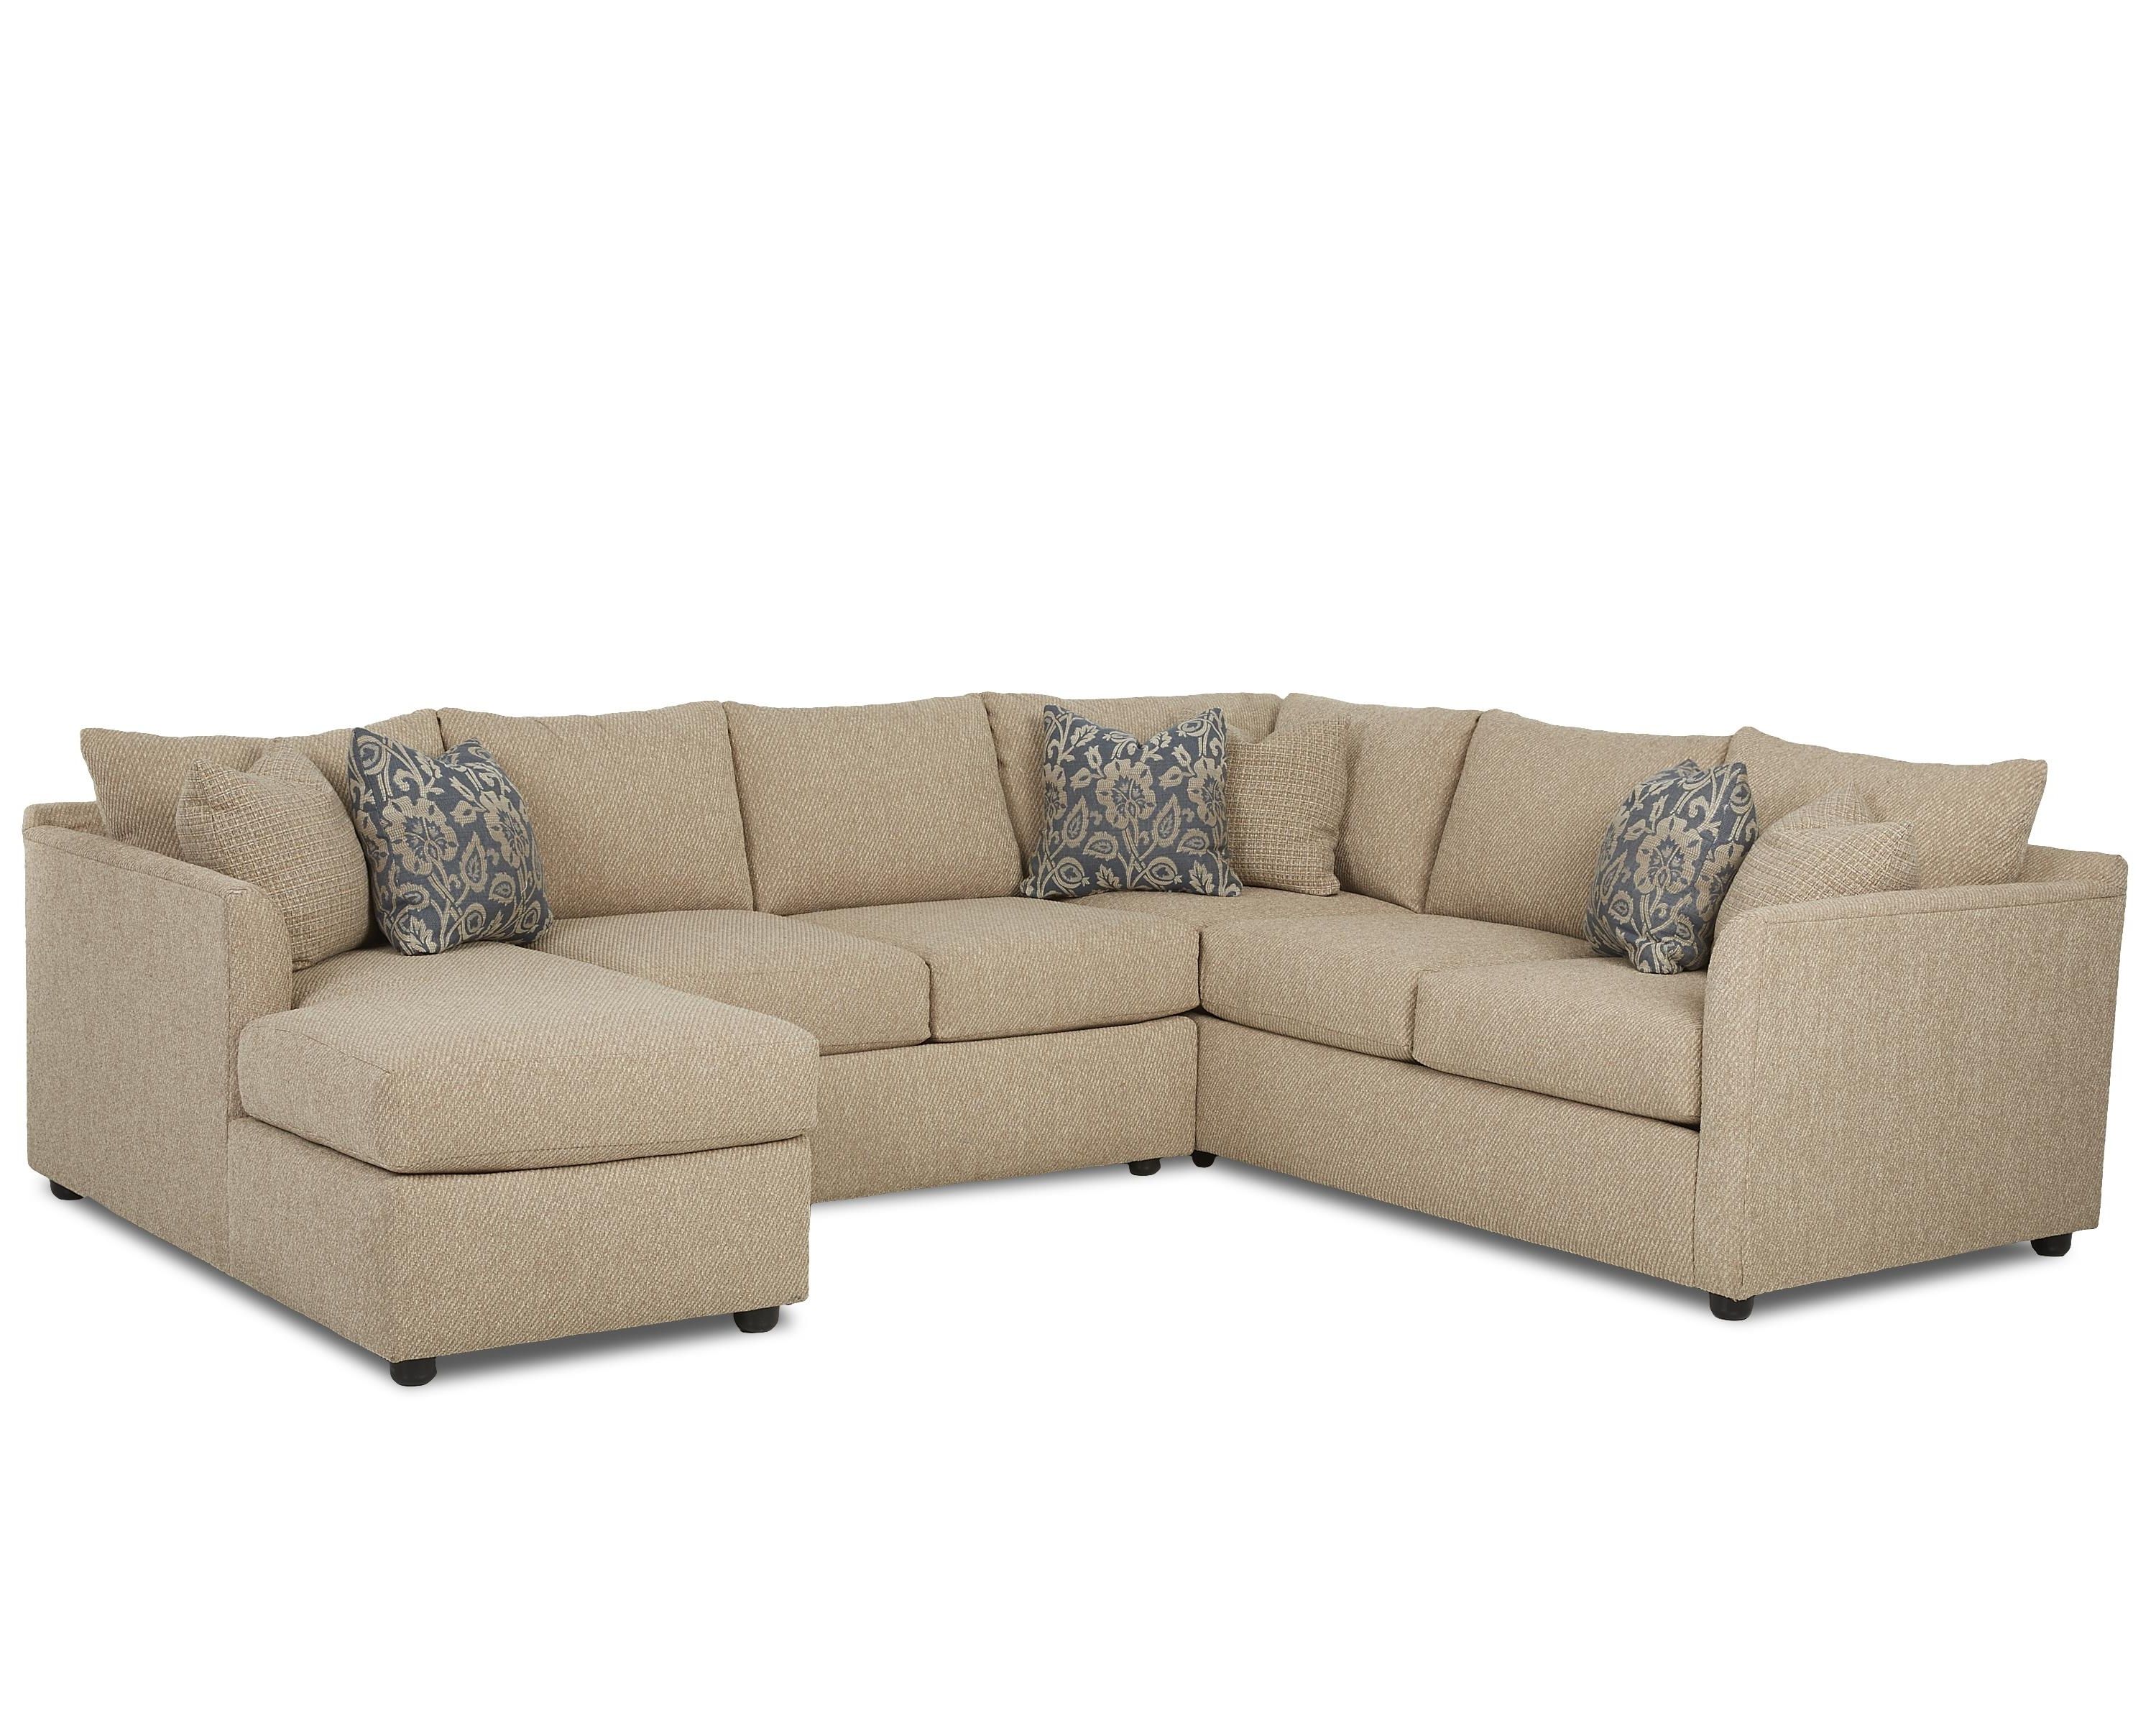 Popular Sectional Sofas At Atlanta Pertaining To Transitional Sectional Sofa With Chaisetrisha Yearwood Home (Photo 8 of 20)